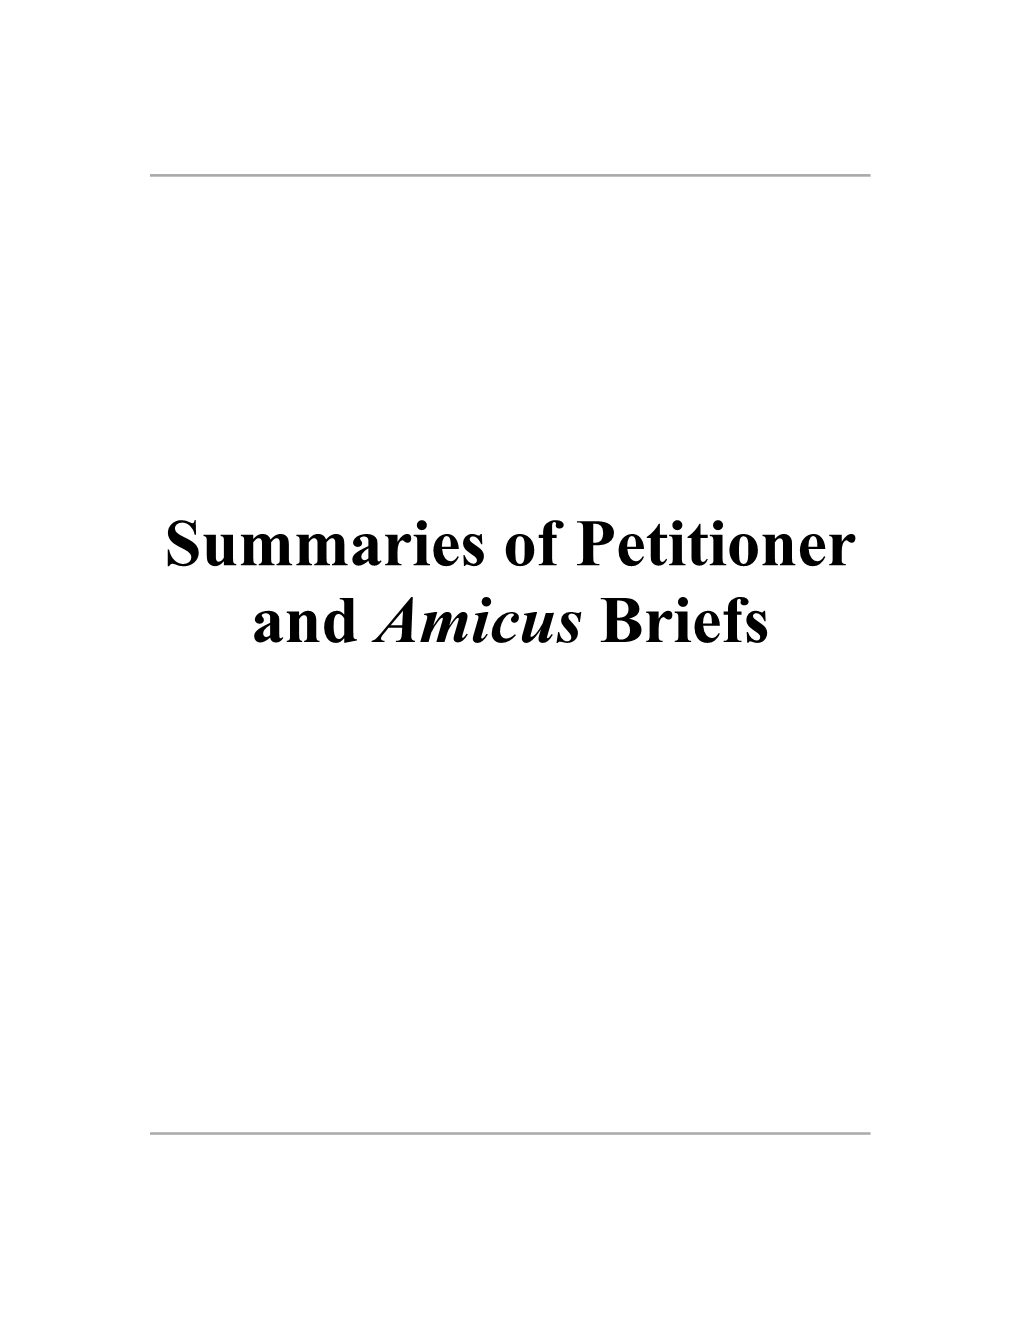 Summaries of Petitioner and Amicus Briefs